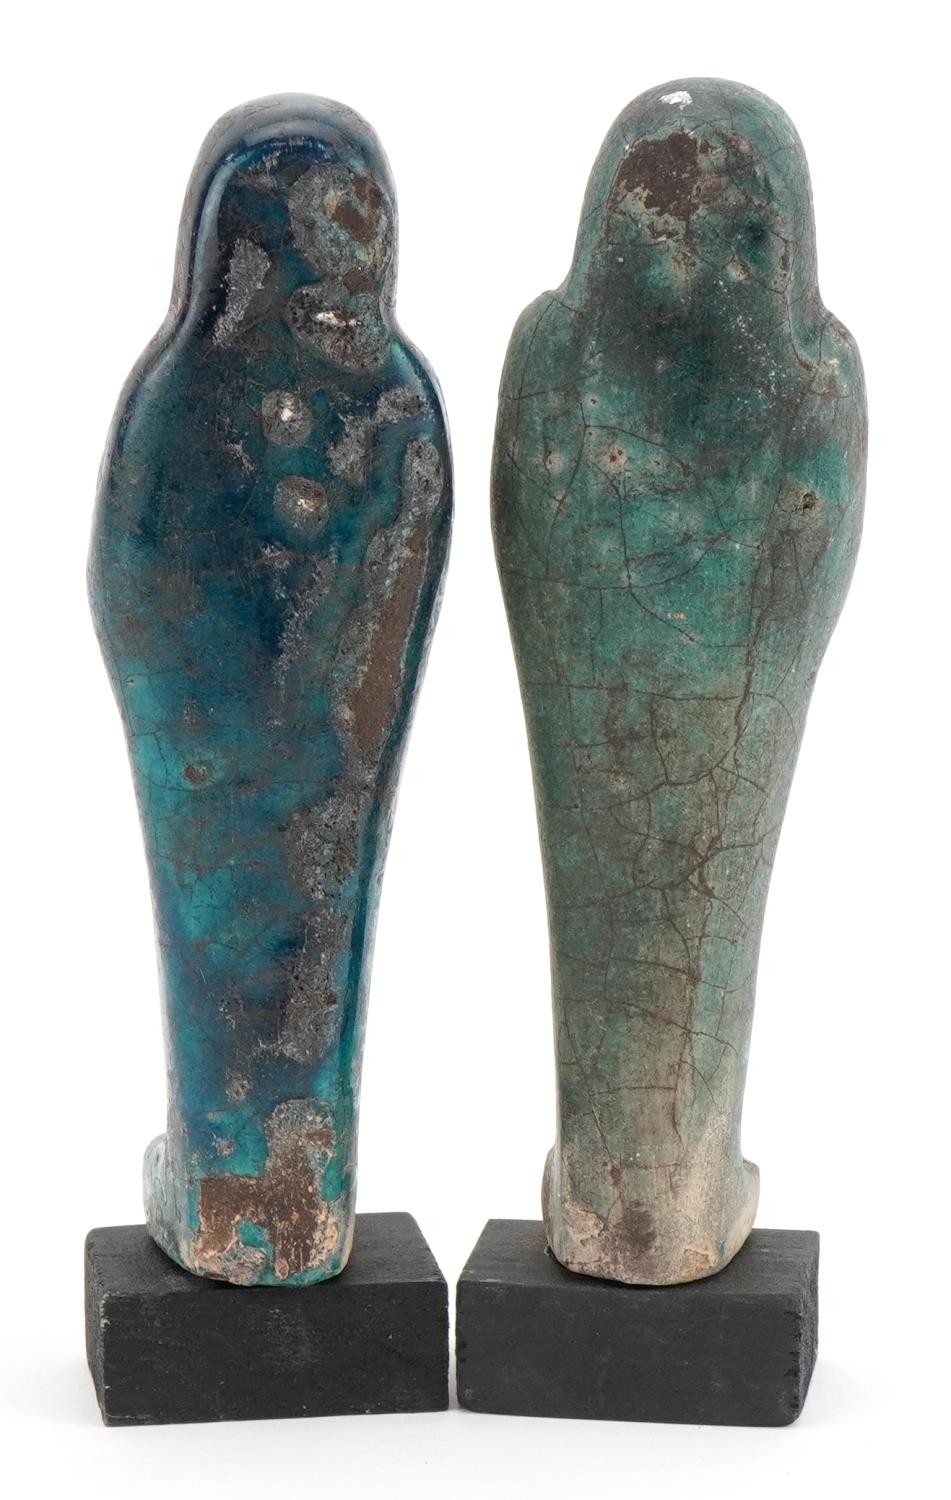 Two Egyptian style shabtis raised on painted wooden block bases, each 18.5cm high - Image 2 of 3